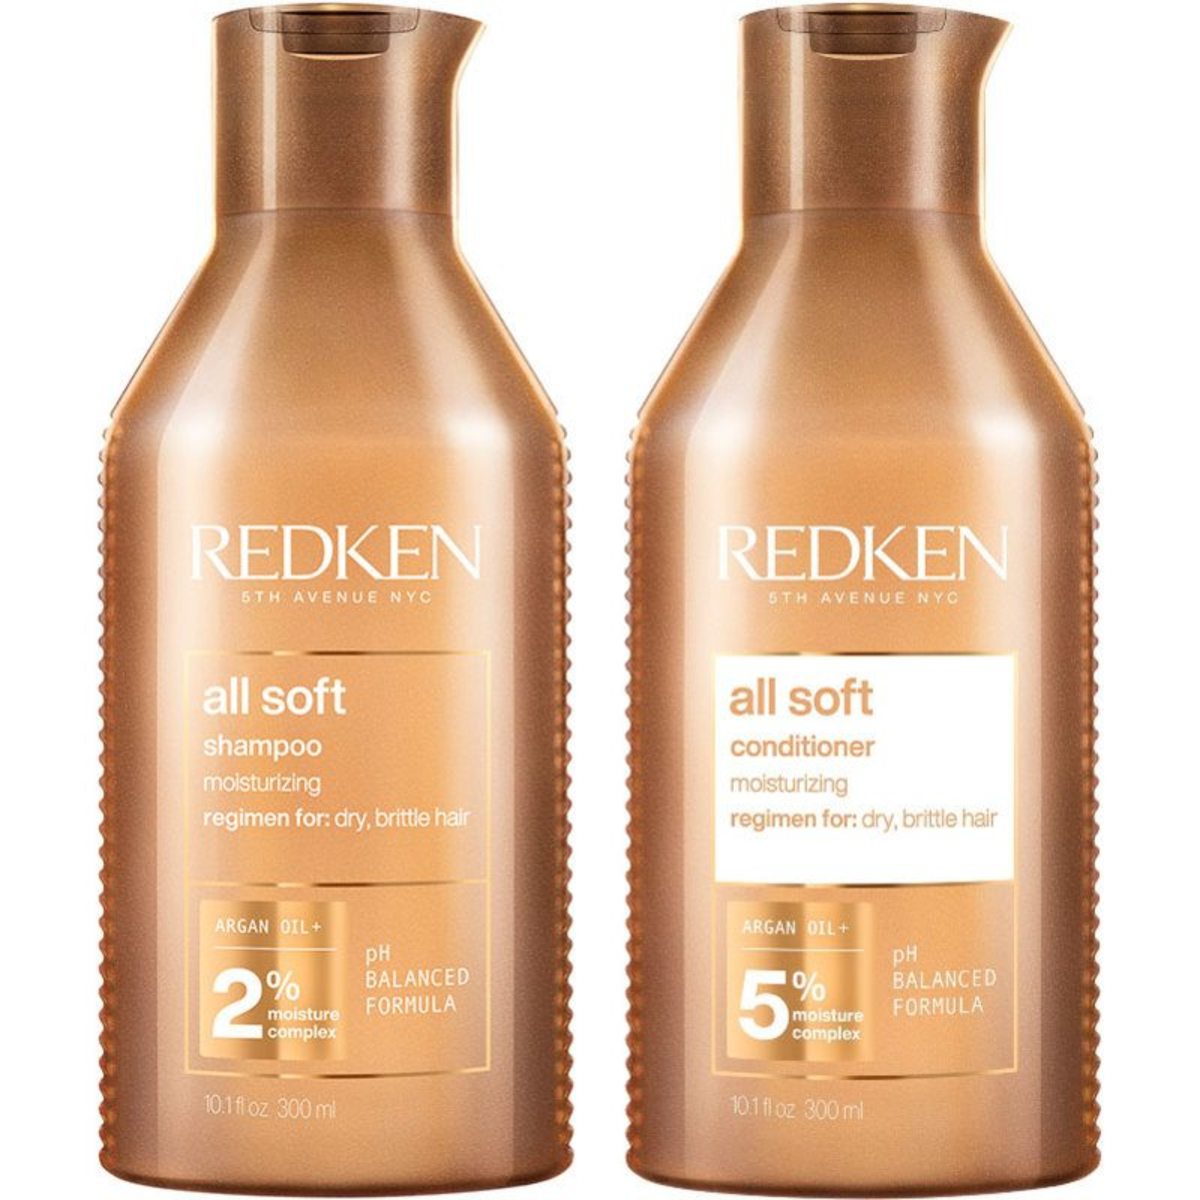 Redken Shampoo: The Best Way to Keep Your Hair Healthy